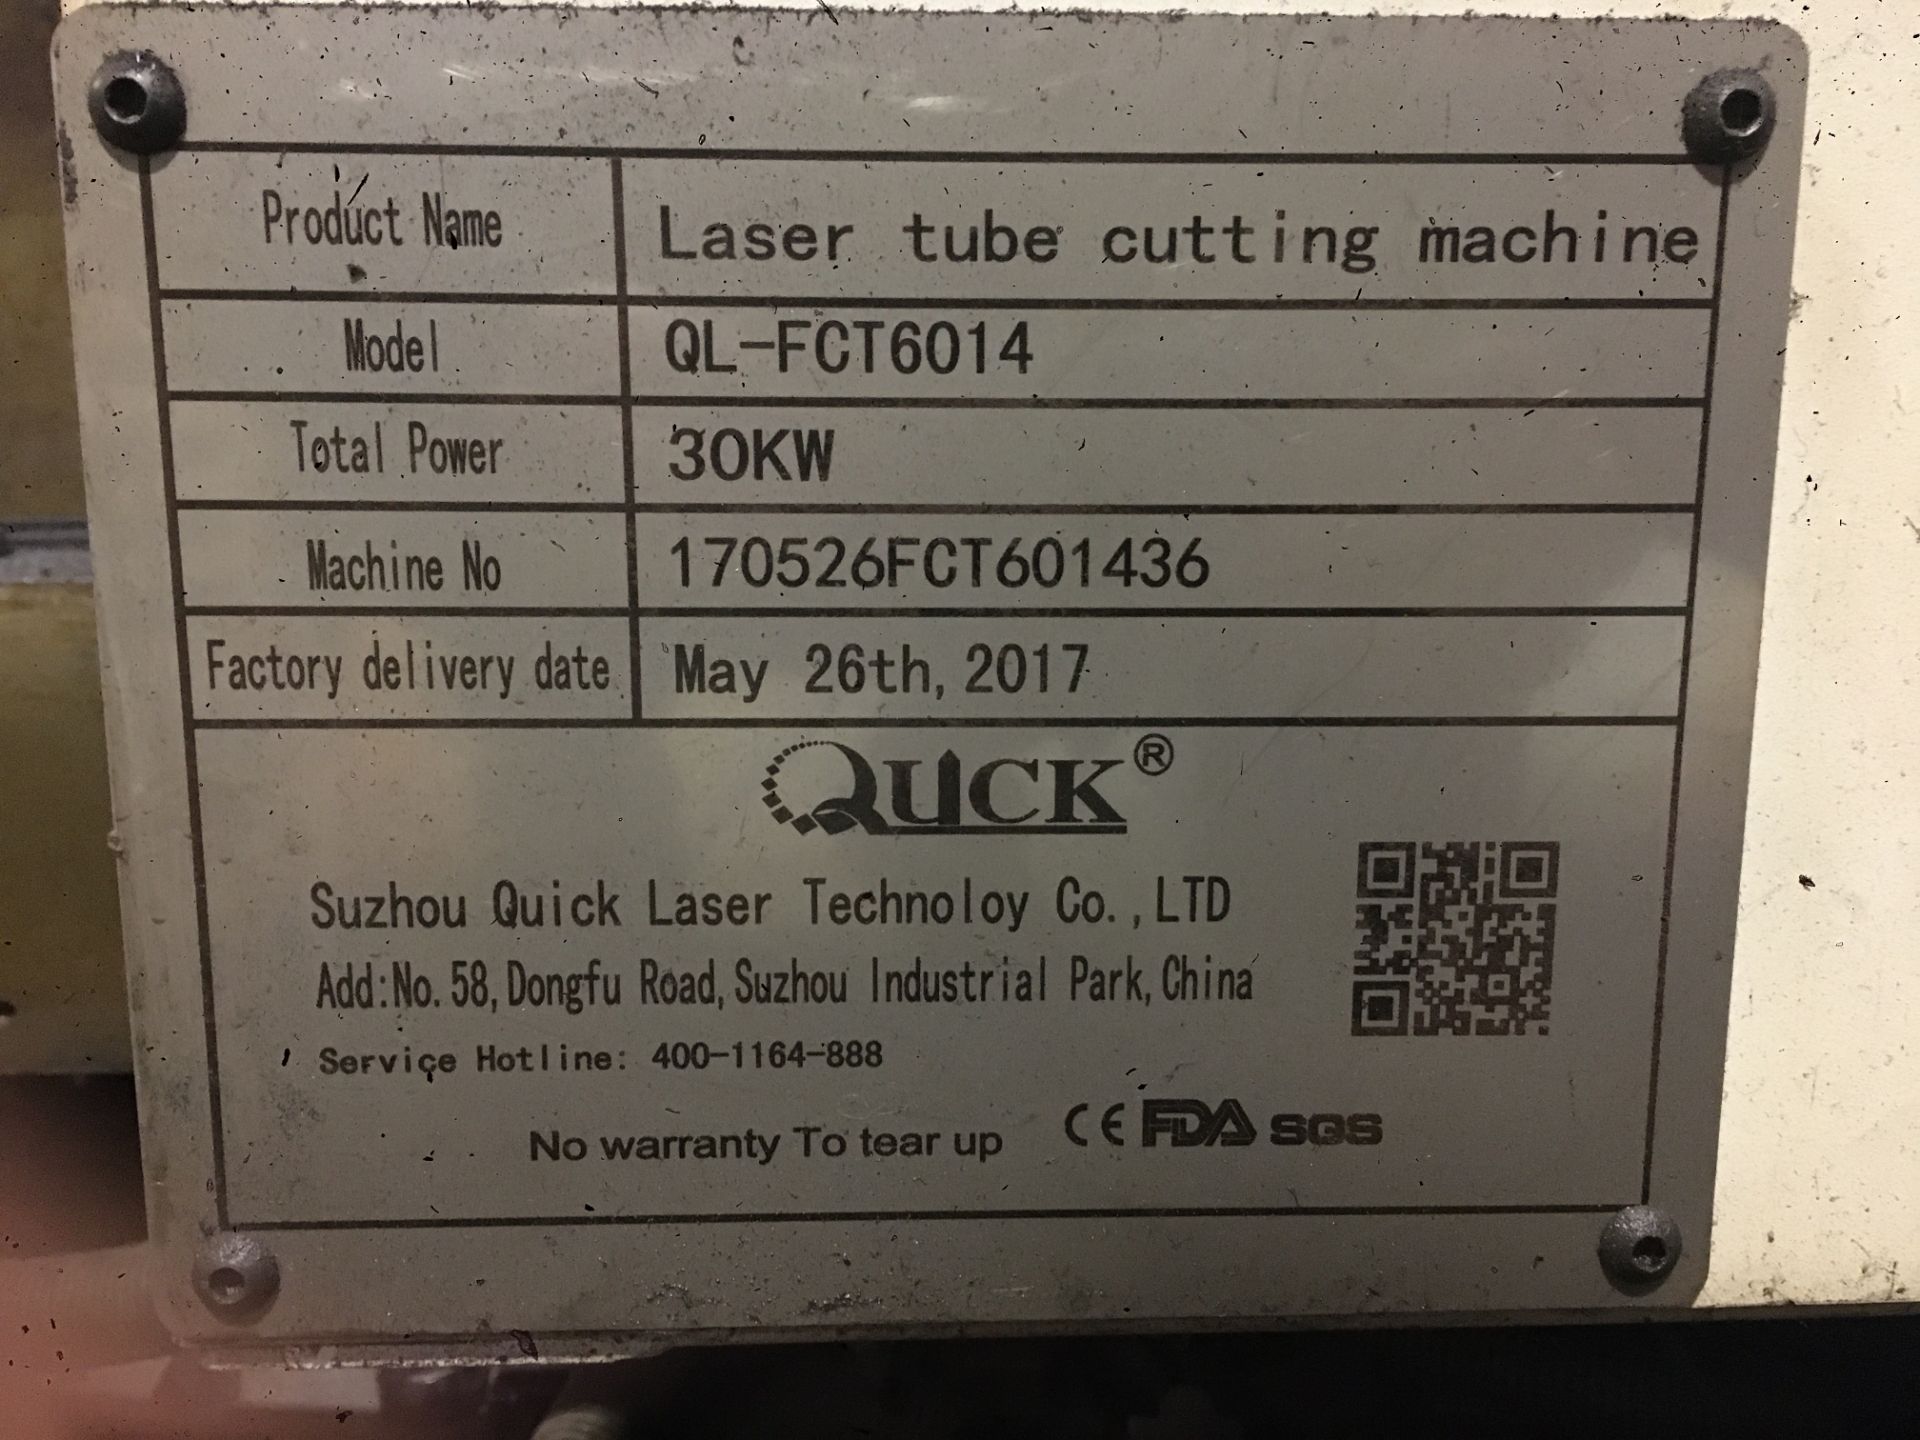 Suzhou Quick Laser Technology Co. Ltd, QL-FCT6014D 30kw laser tube cutting machine, Serial No. - Image 7 of 14